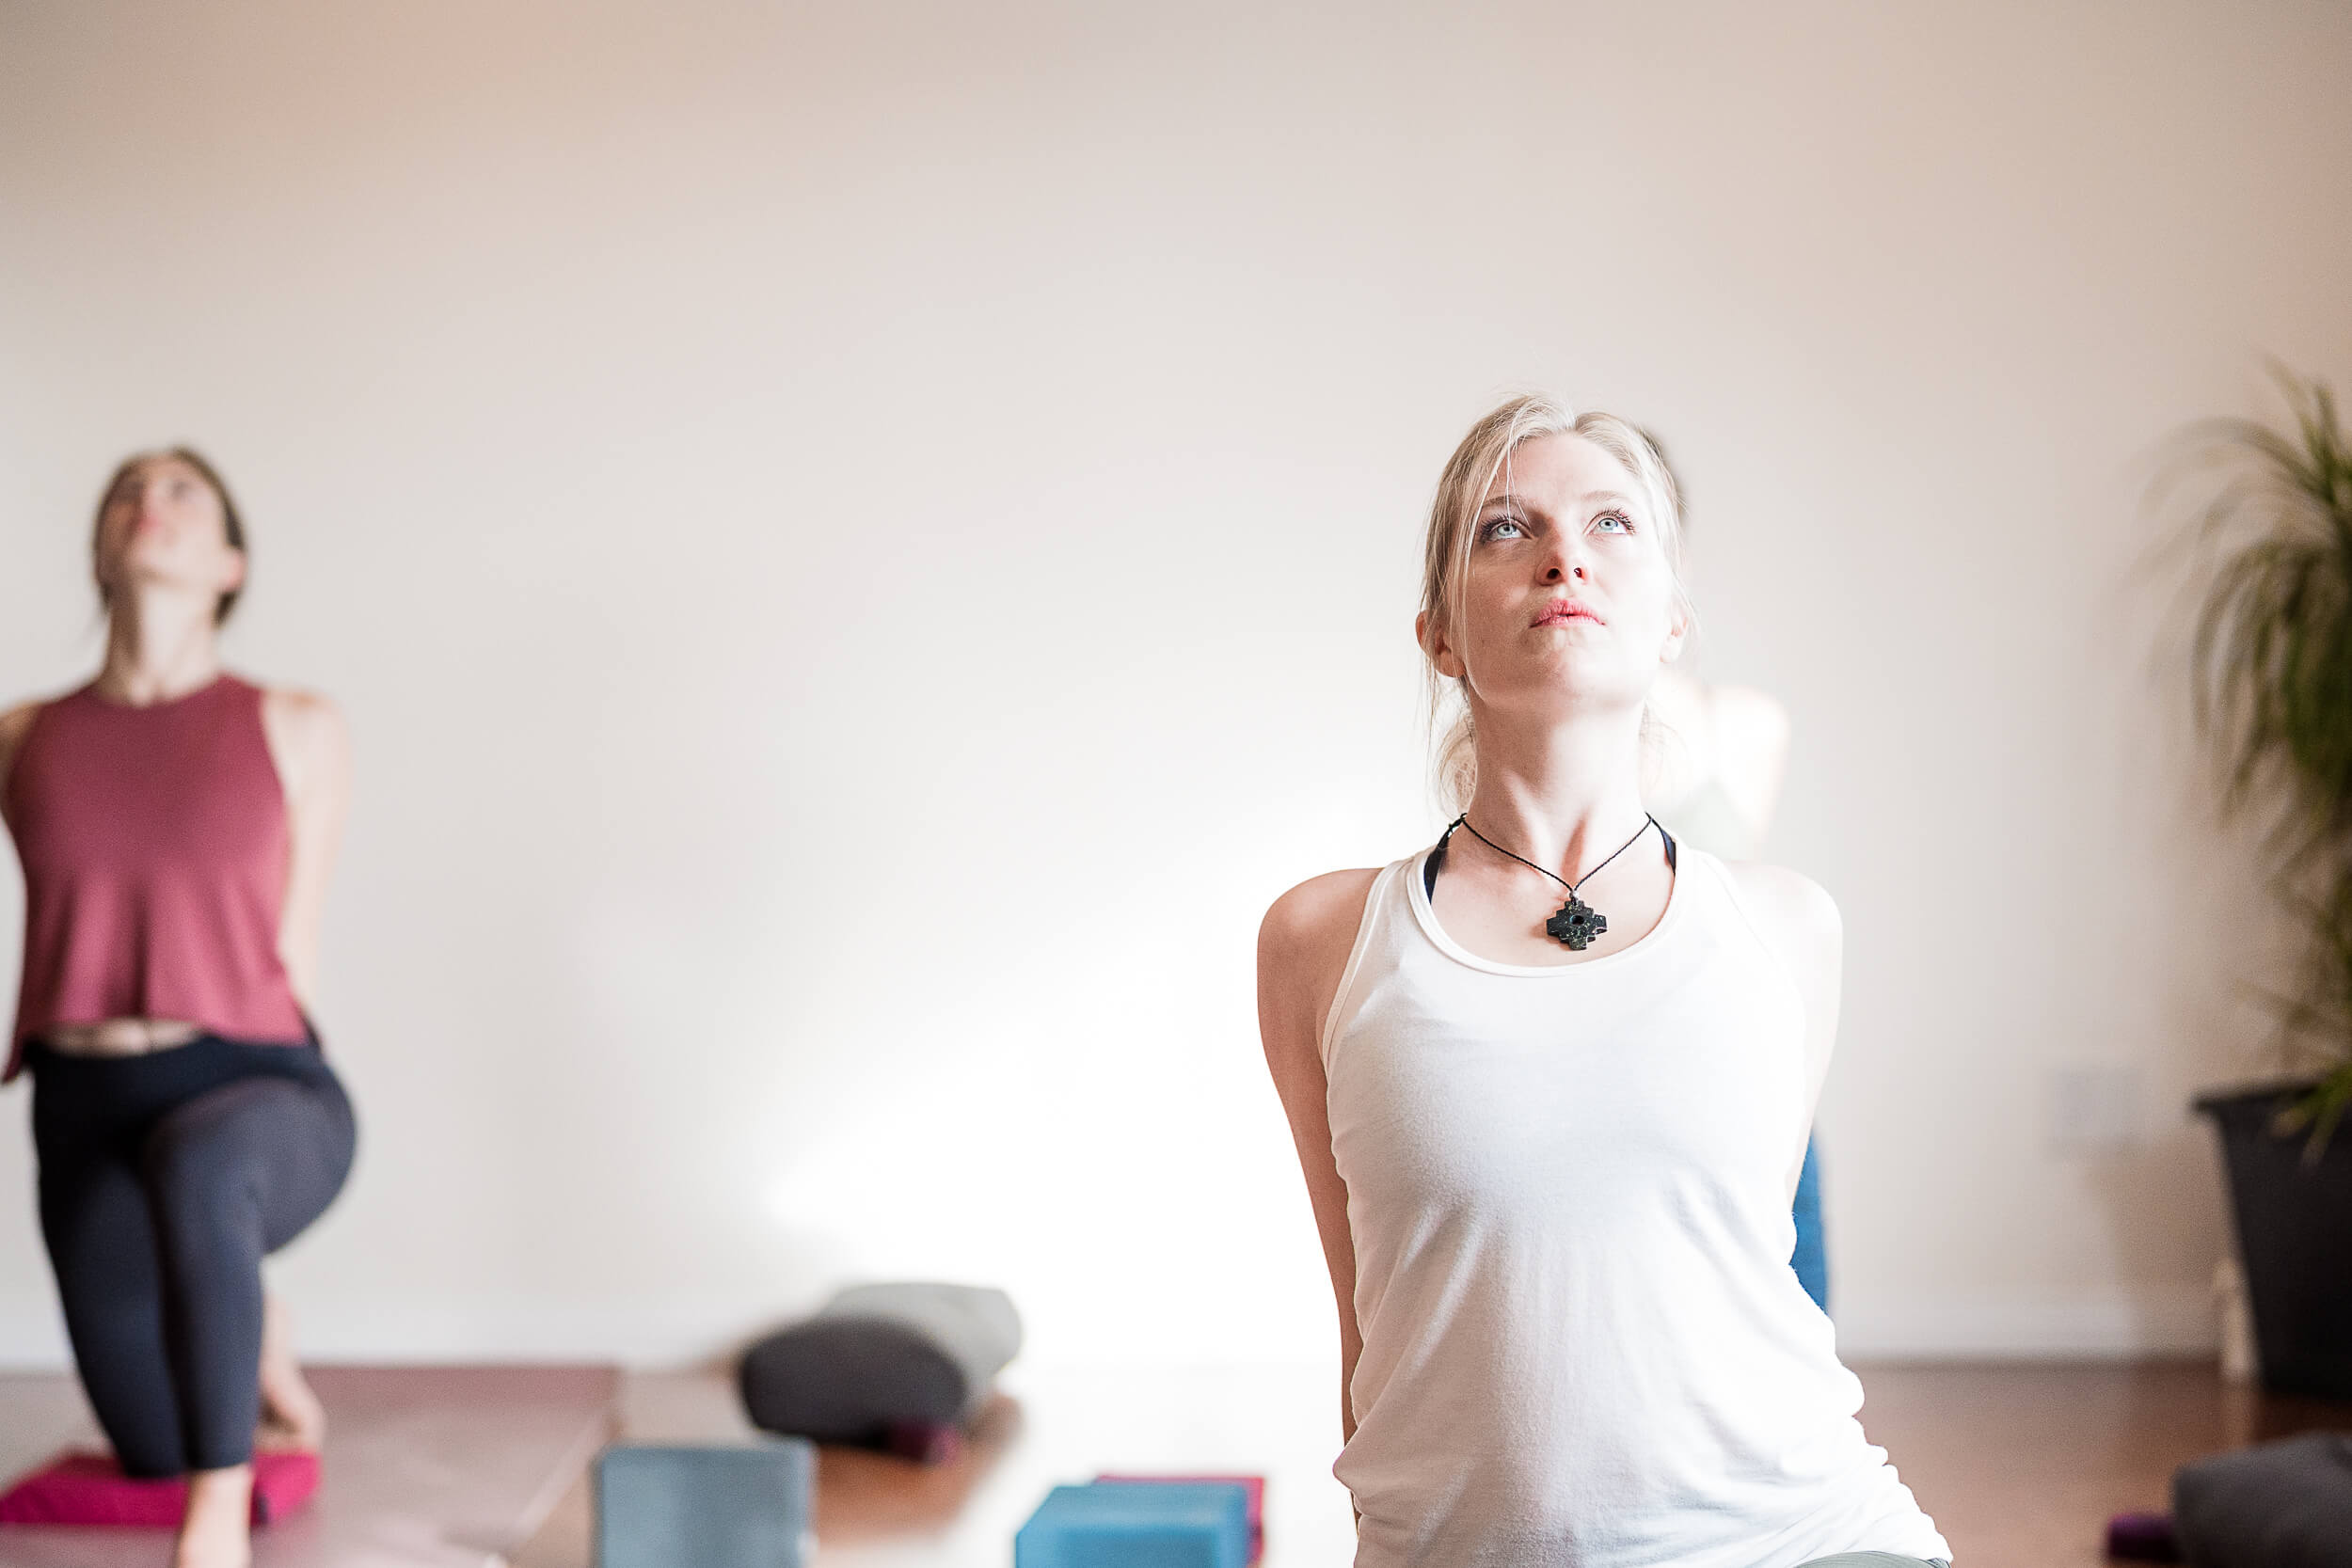 A person in a white tank top performs a yoga pose with a gaze upward, embodying tranquility and focus at Shala Yoga studio in Squamish, with soft natural light enhancing the calm atmosphere.